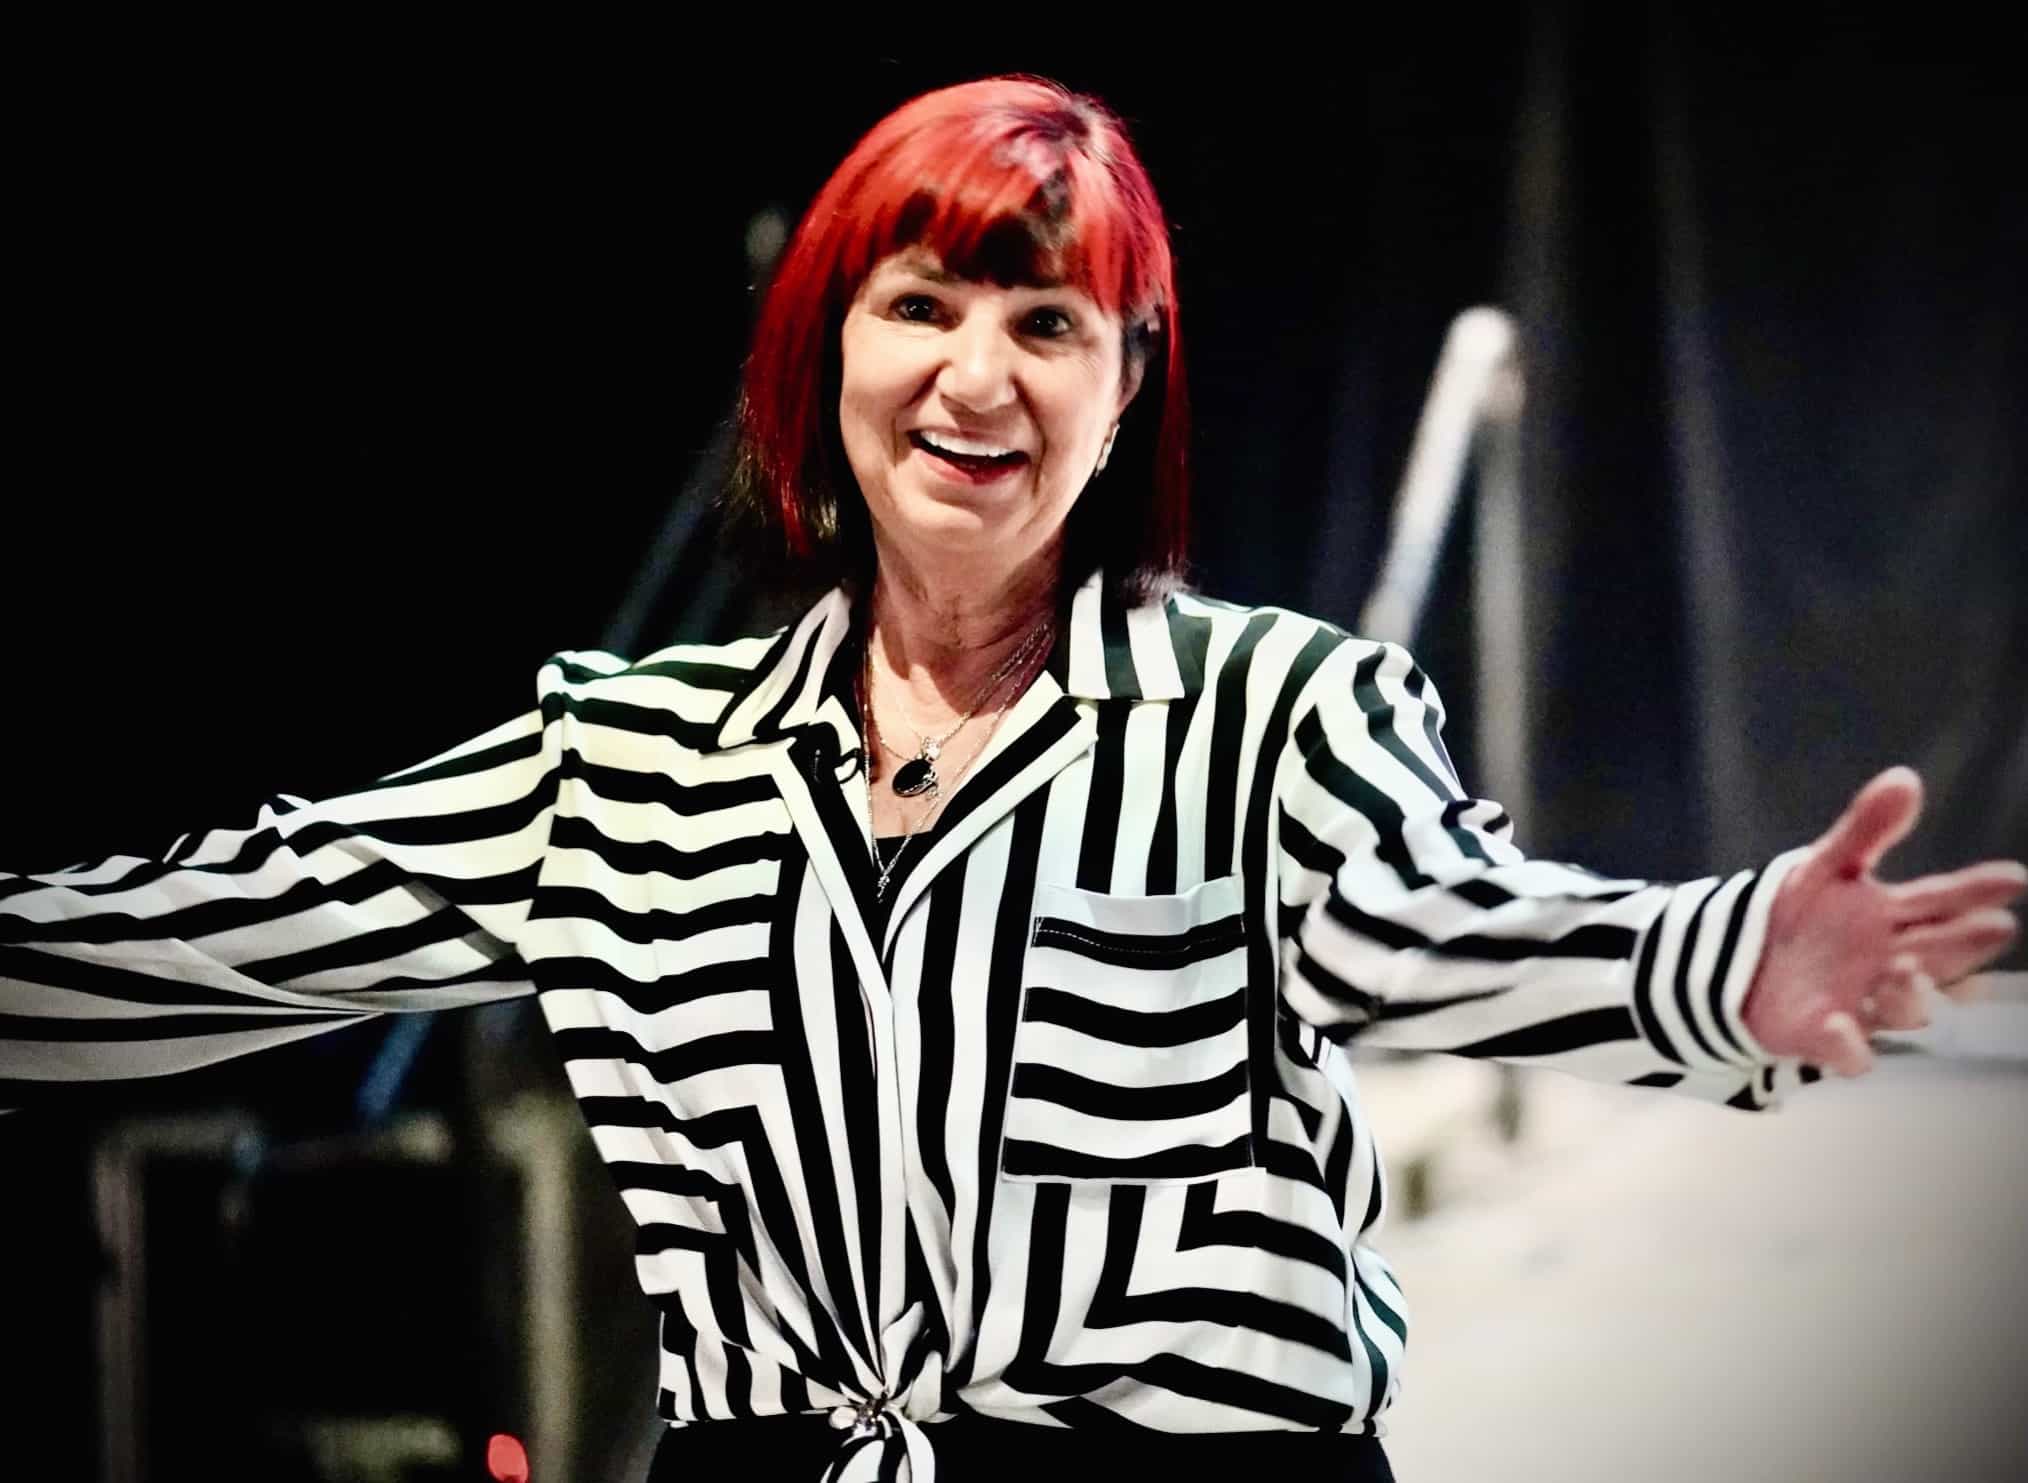 Gail Taylor, wearing a black and white striped blouse, is smiling and extending her arms as if to welcome someone or gesture during a presentation on her midlife pivot: from finance to music